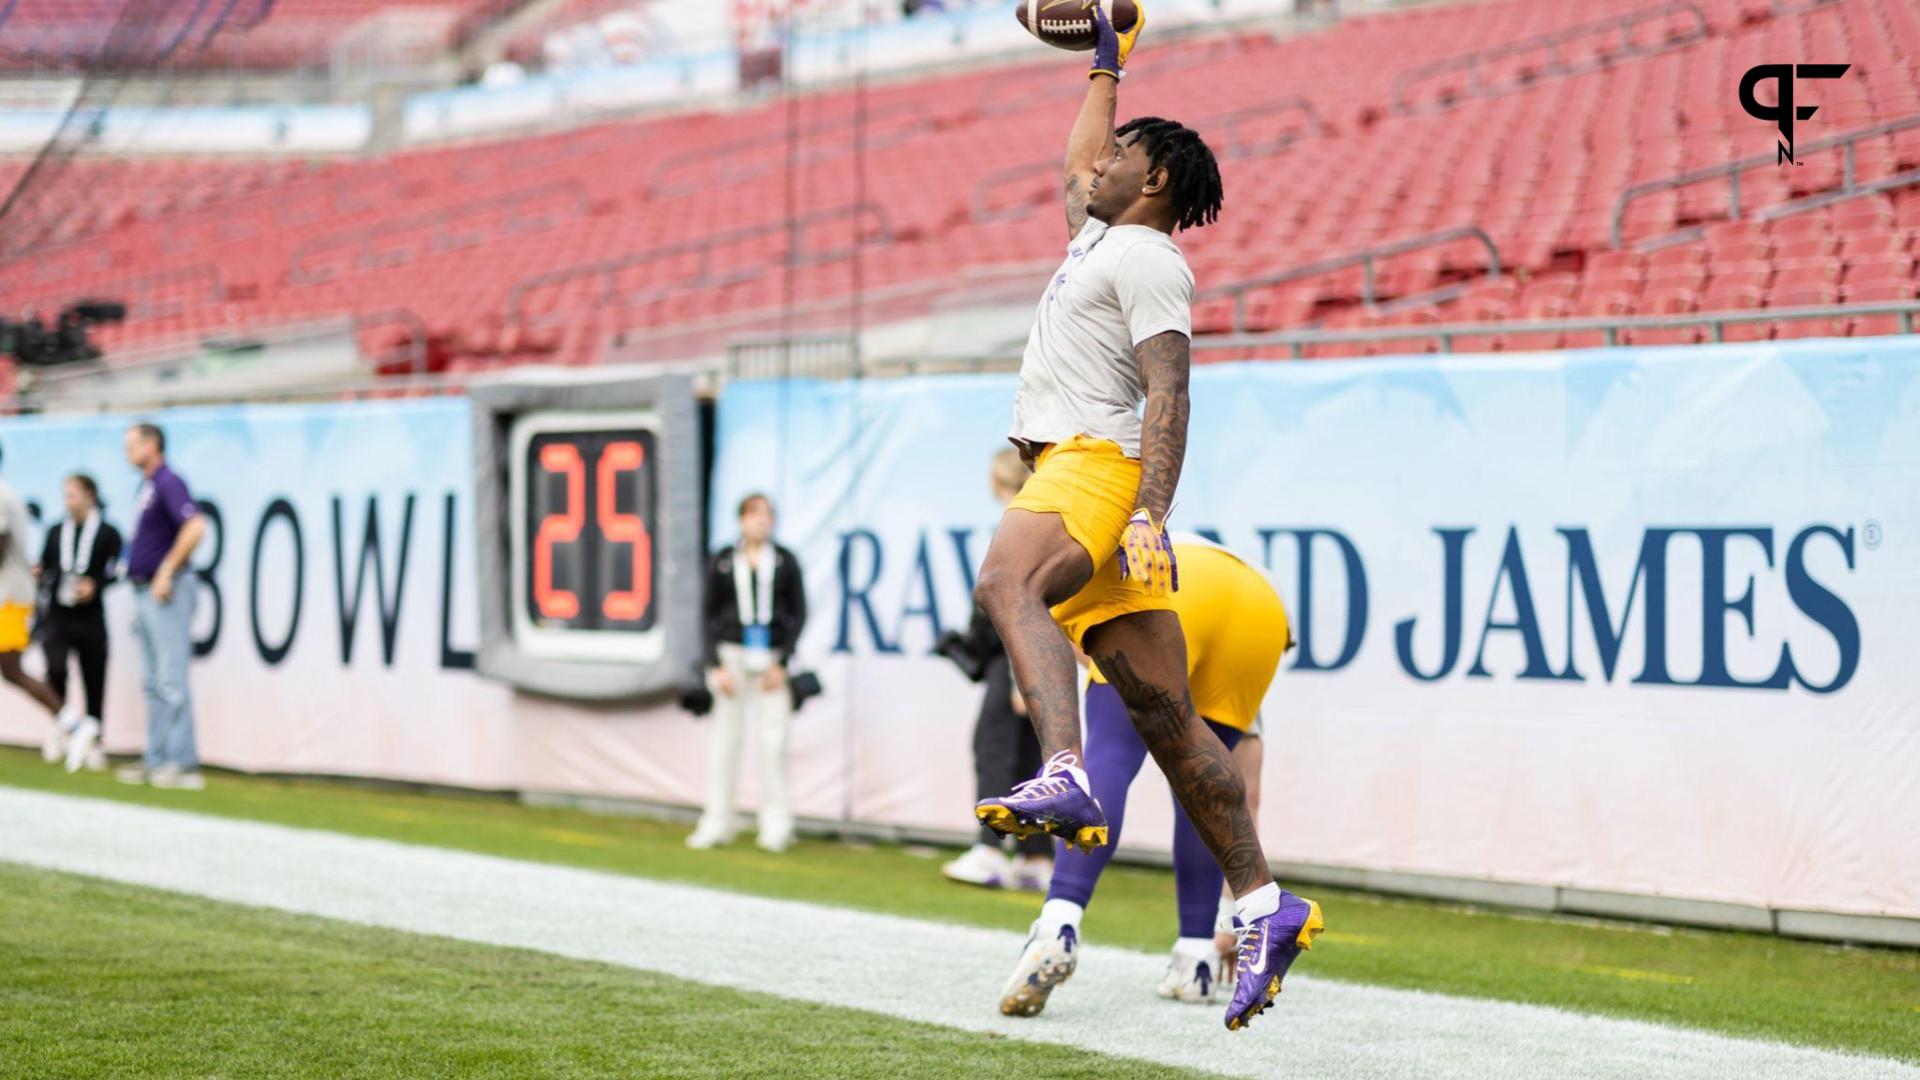 Nfl Draft: Where Lsu Tigers Are Trending In Recent Mock Drafts